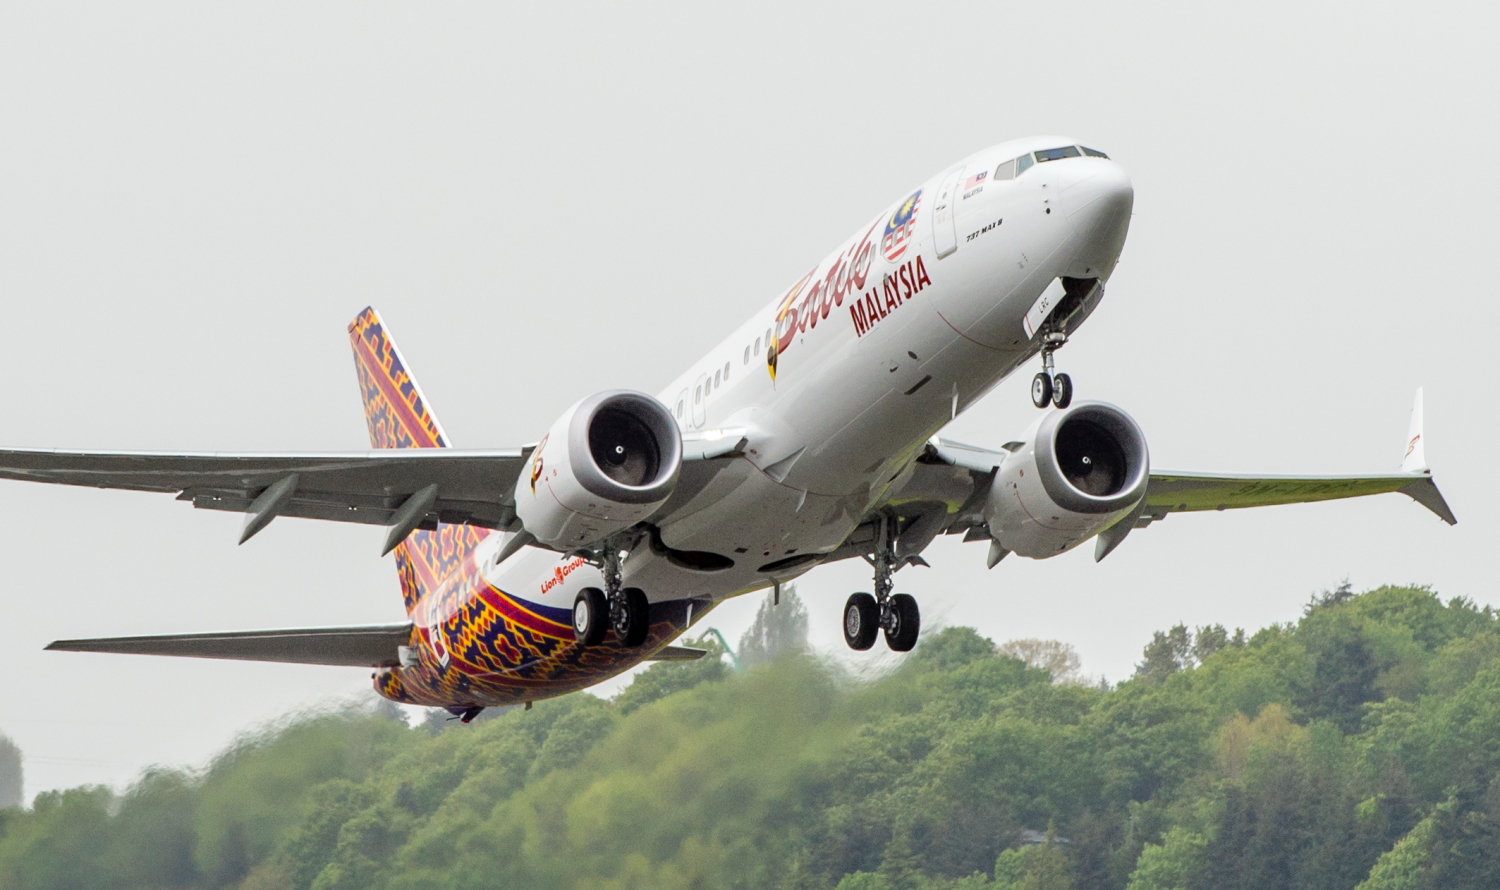 Malindo Air Boeing 737 MAX 8. Click to enlarge.